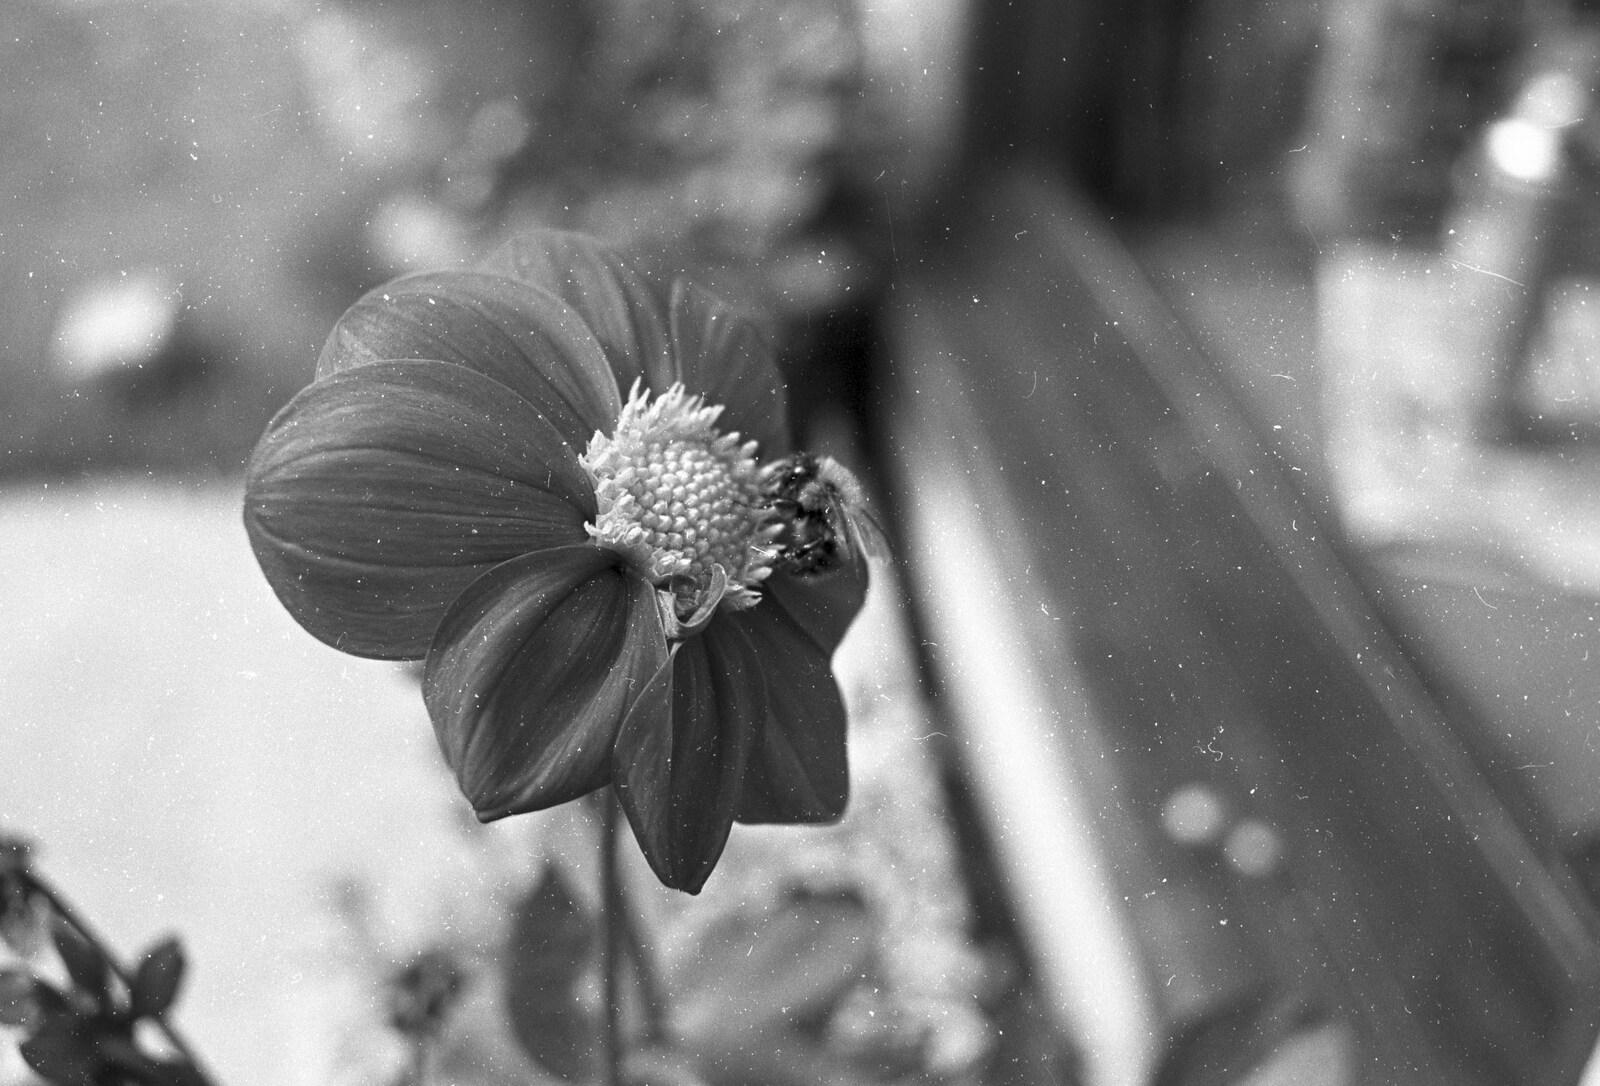 A Black and White Life in Concrete, Stuston, Suffolk - 3rd September 1992: A bee in a flower